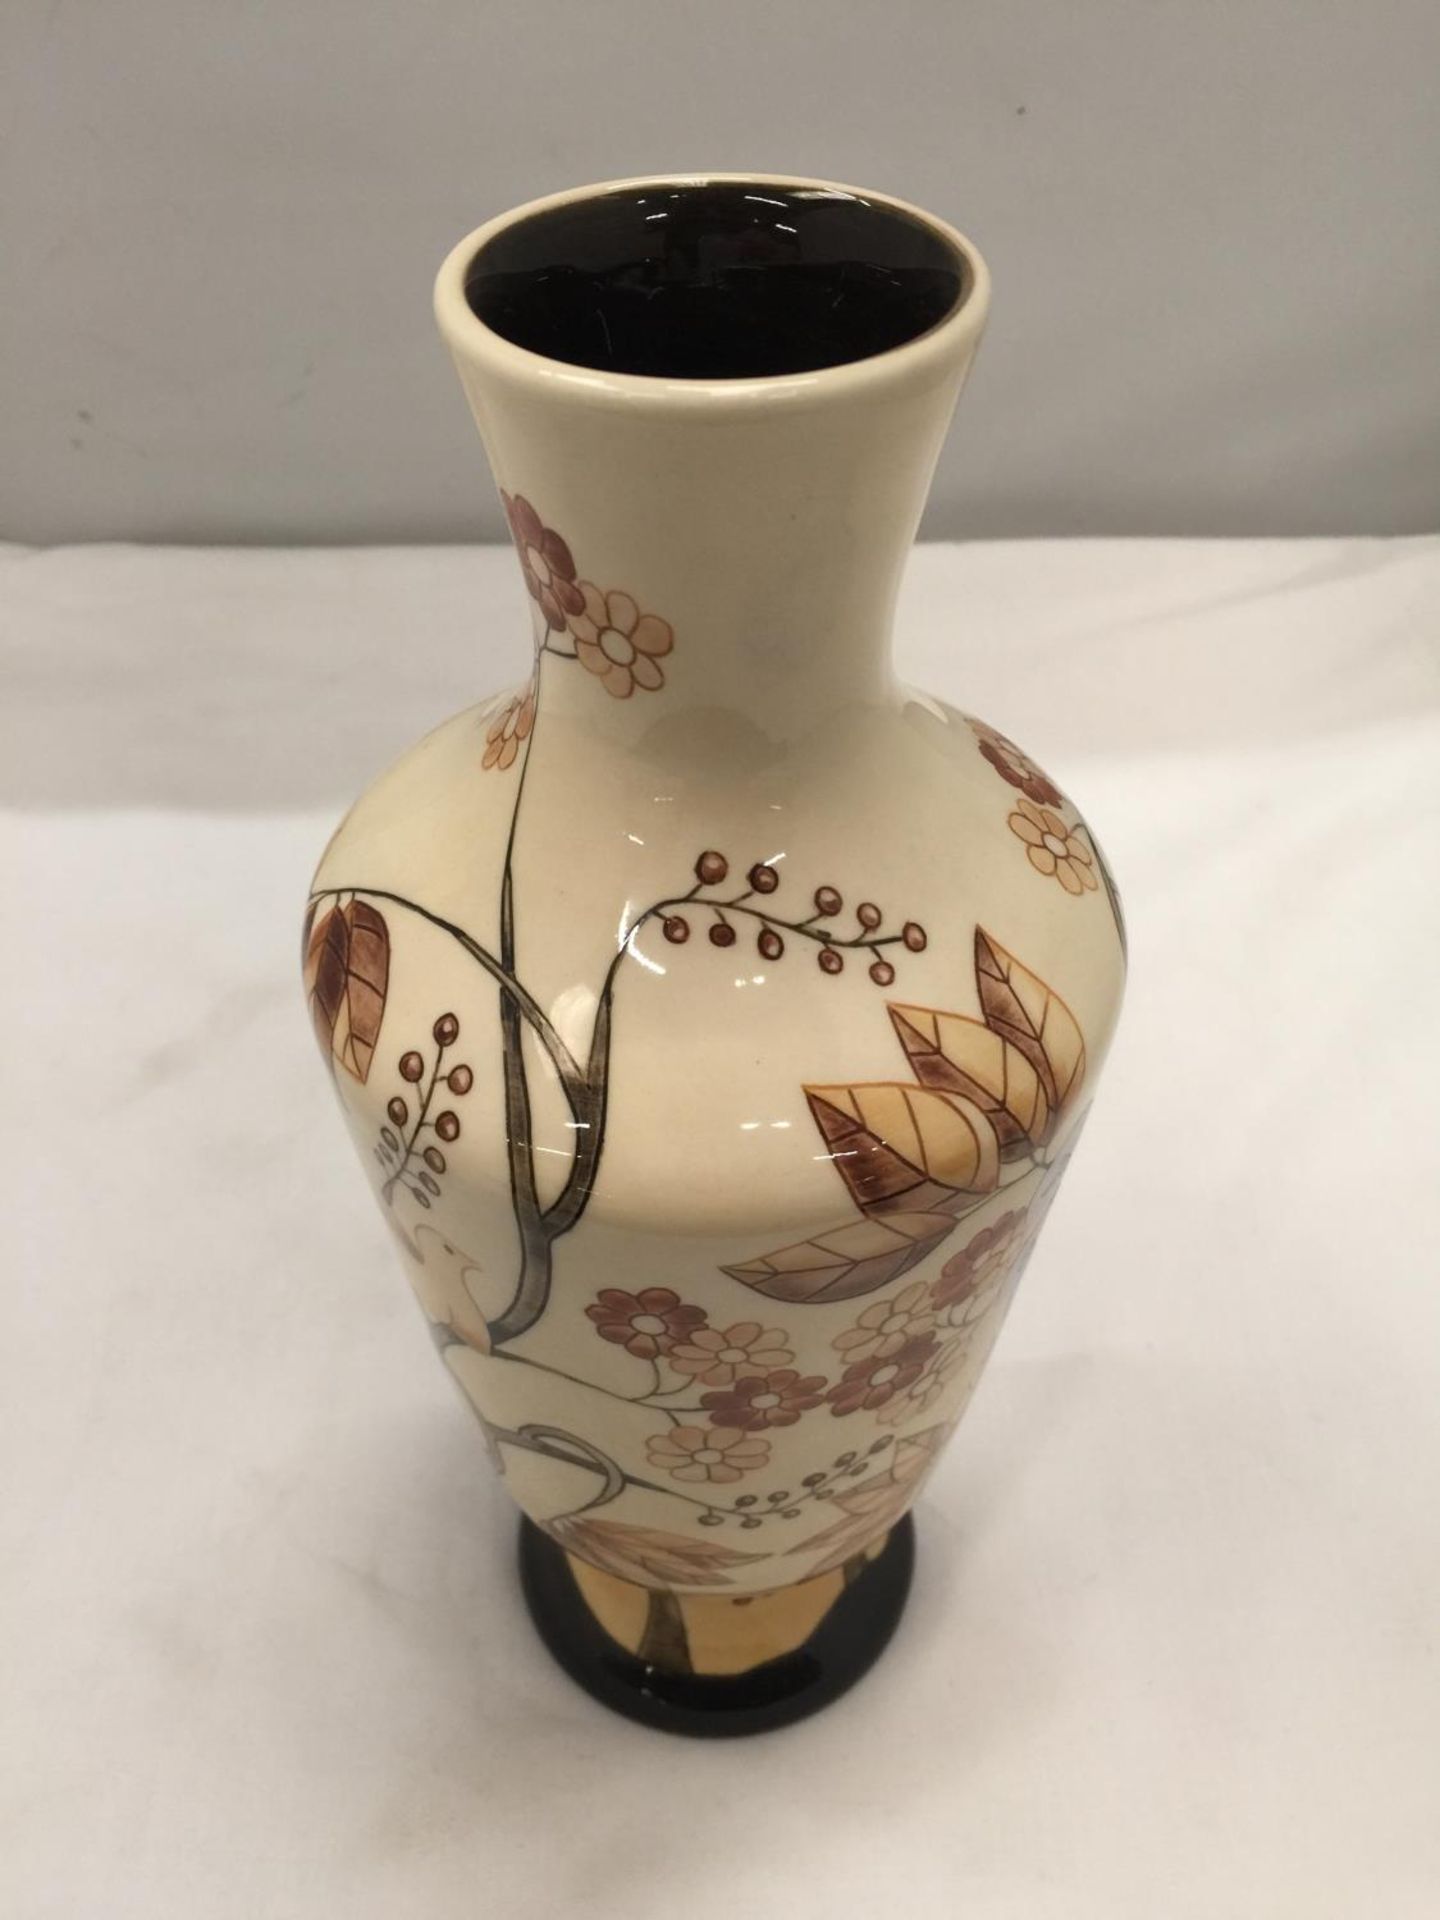 A COBRIDGE TRIAL VASE WITH IMAGES OF BIRDS AND TREES SIGNED TO THE BASE HEIGHT 26CM - Image 2 of 3